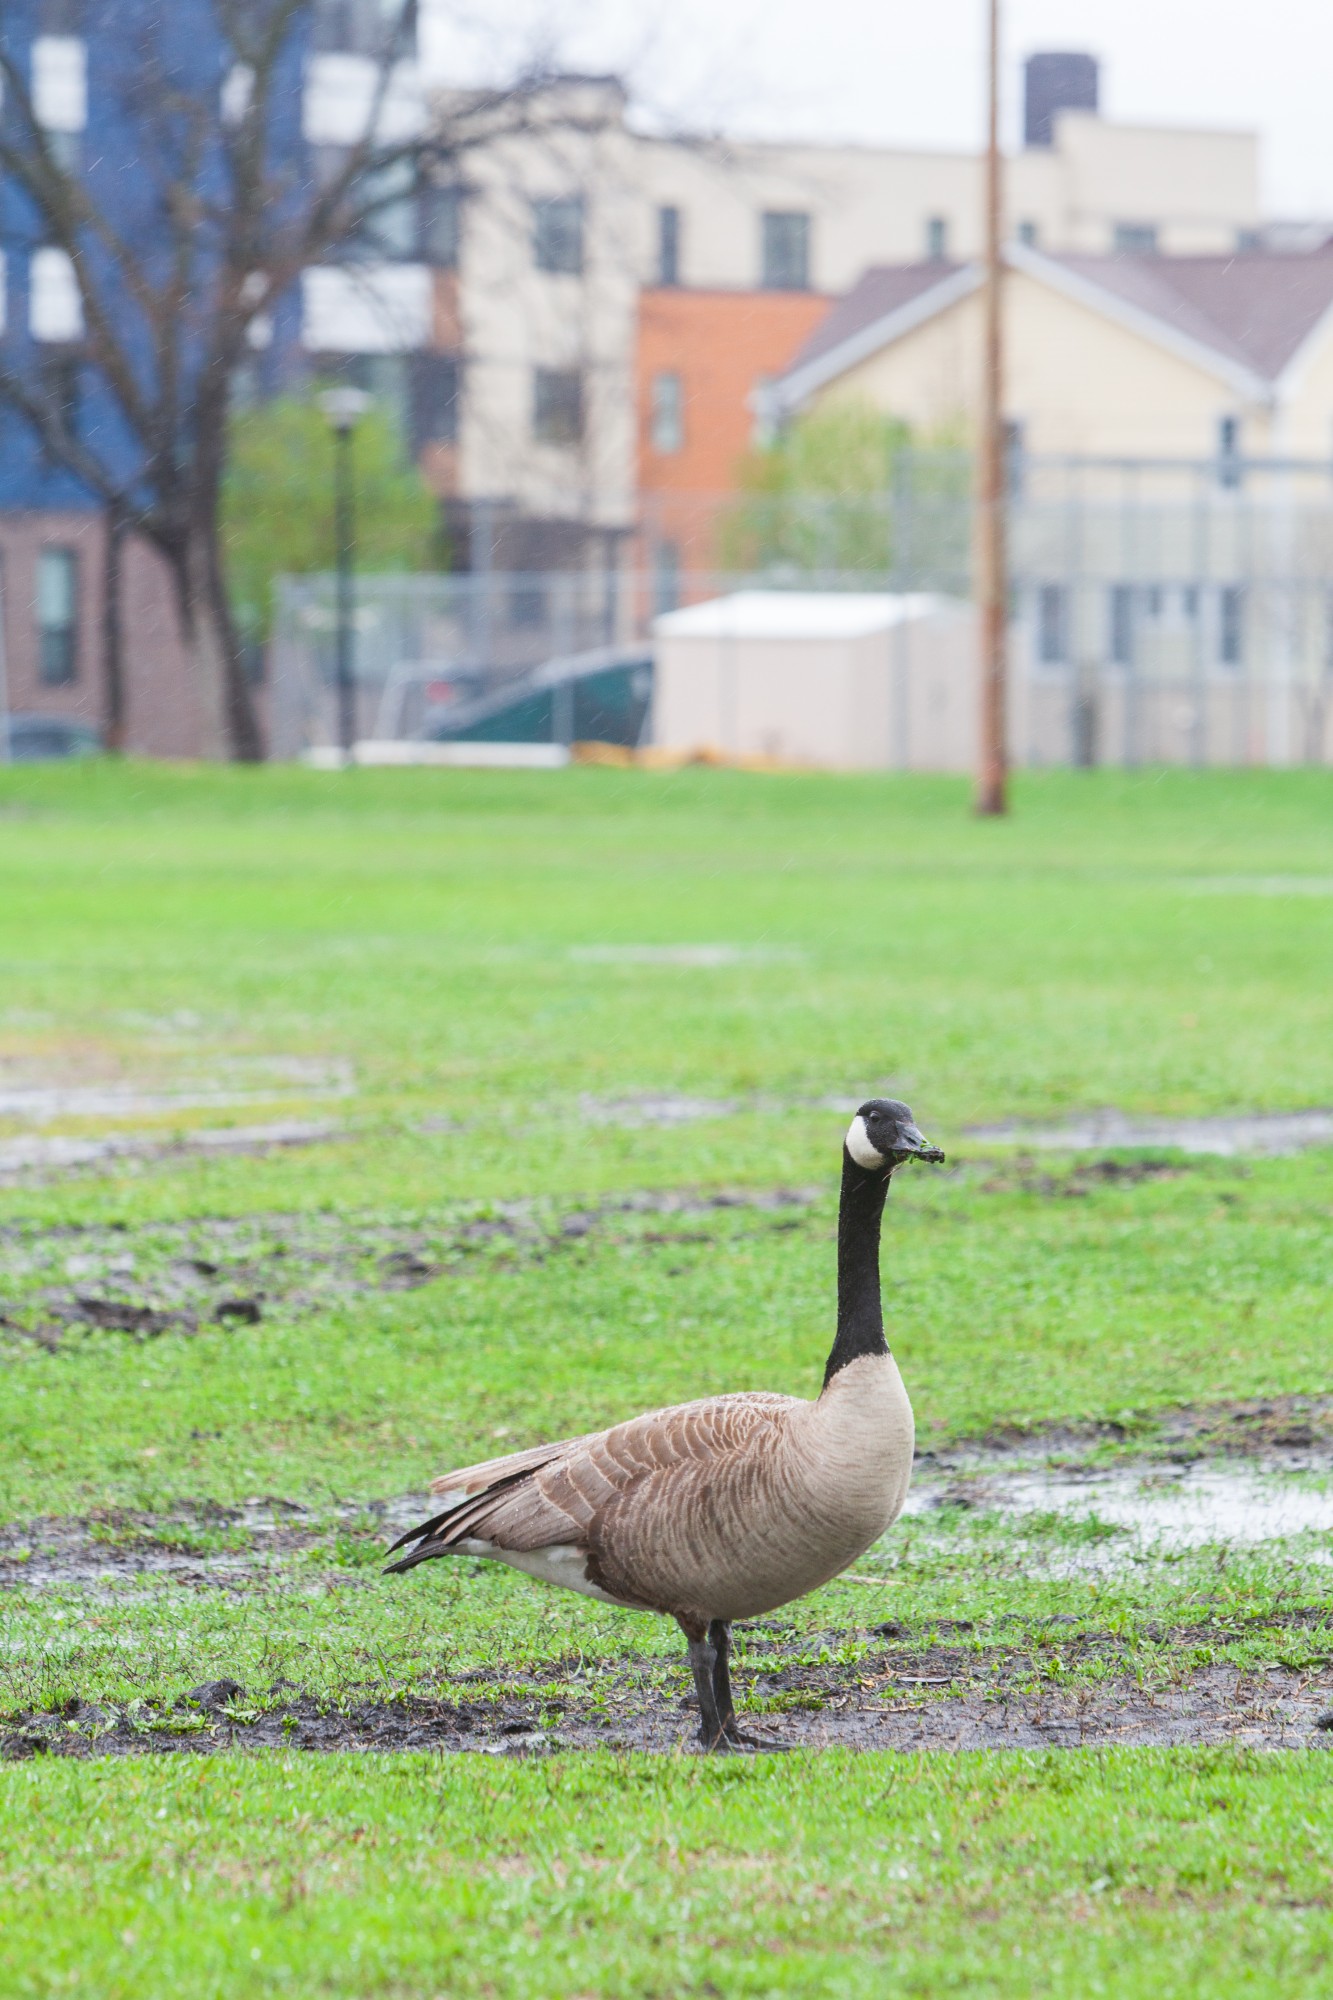 A lone goose wanders Van Cleve Park on Tuesday, April 28.